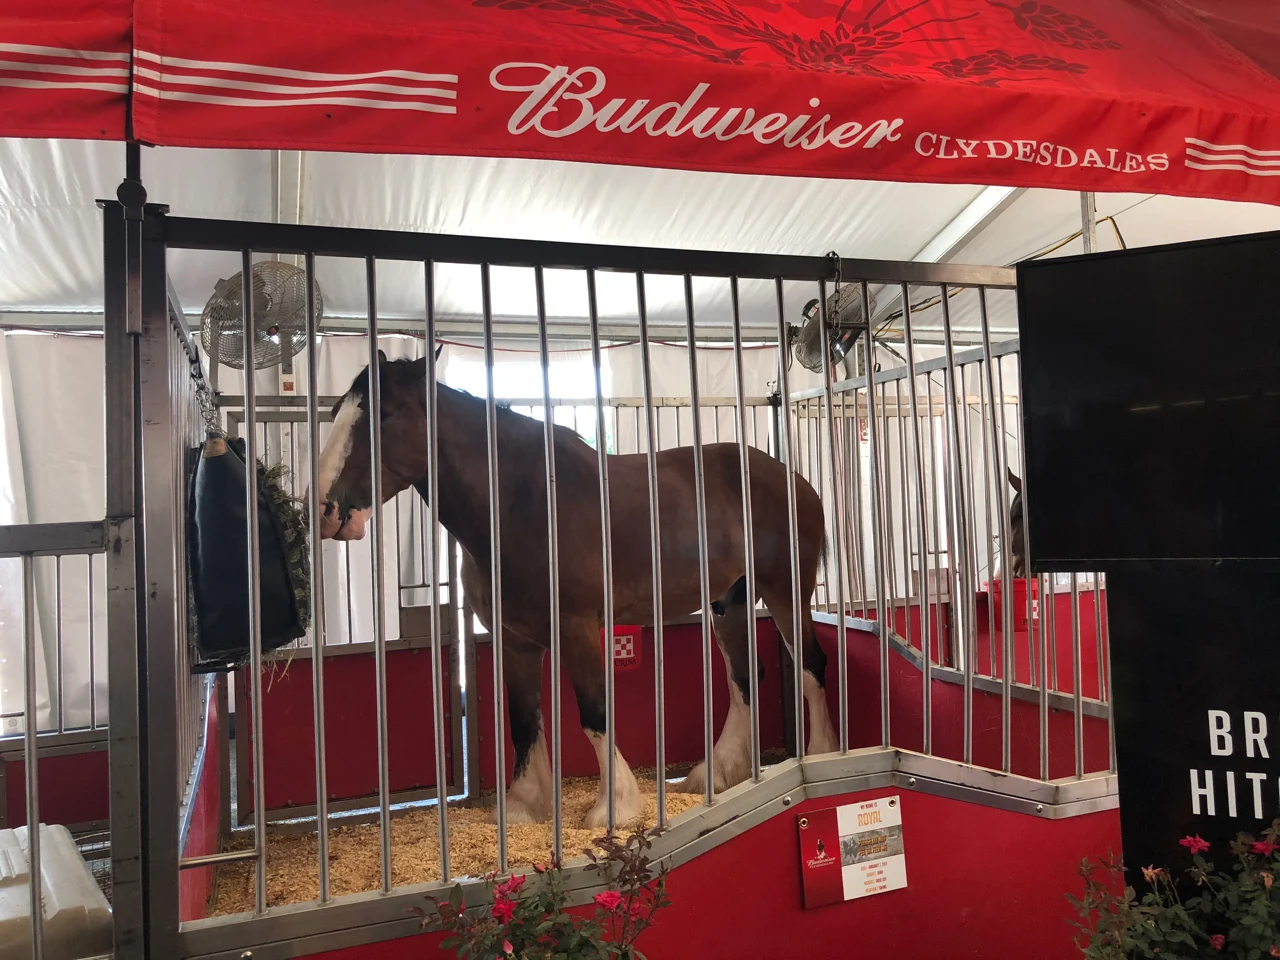 Budweiser Clydesdales at Ohio State Fair